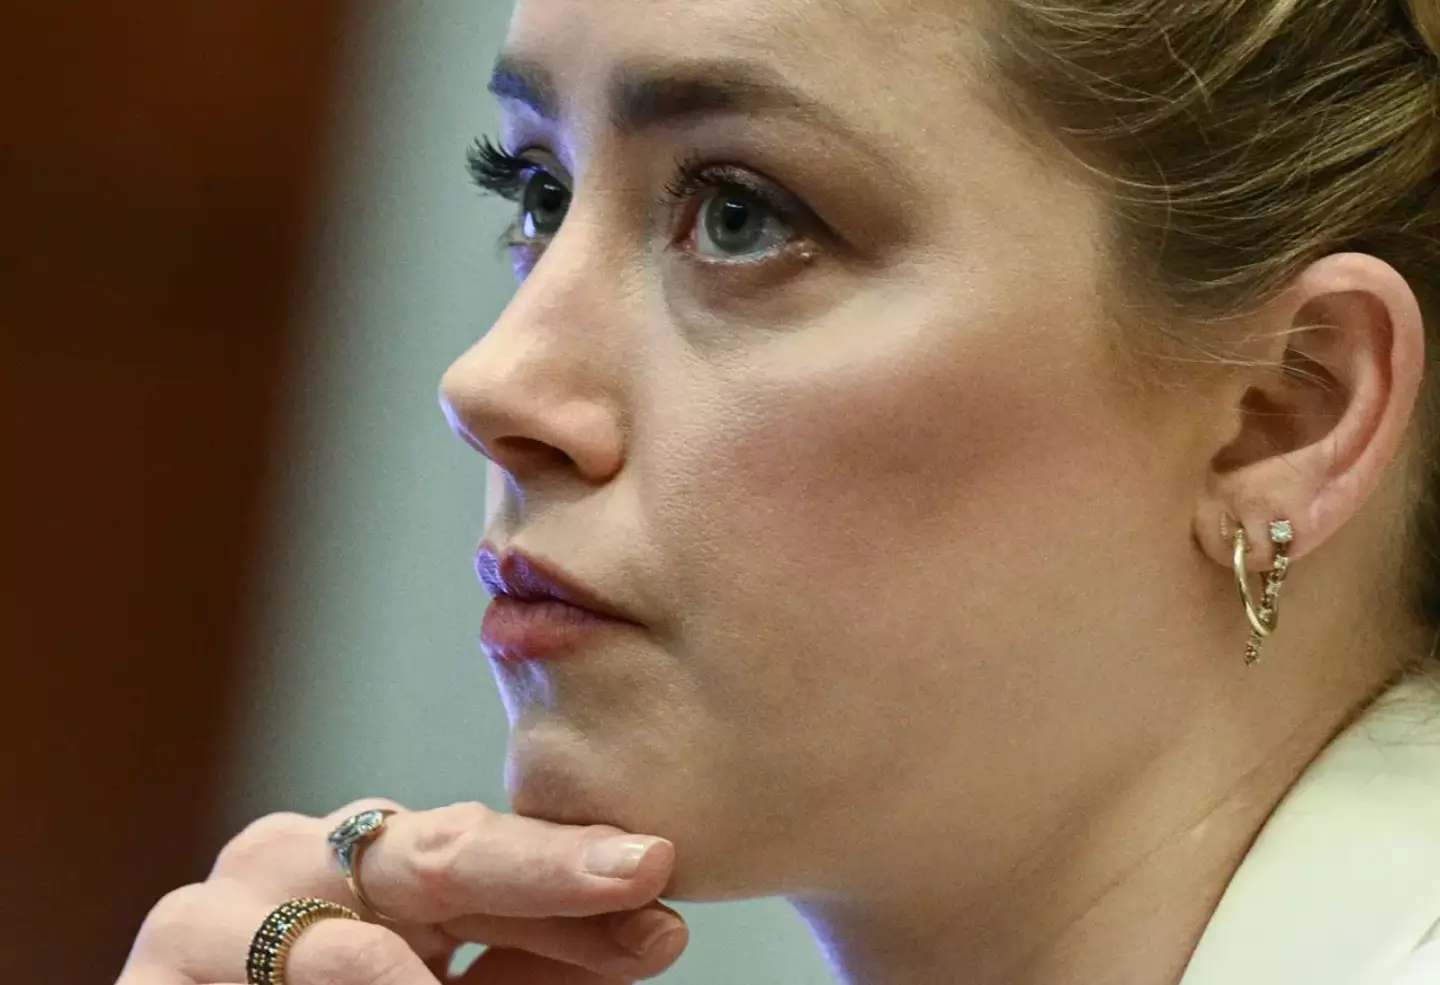 A judge has approved Amber Heard’s request to seal jurors' identities.